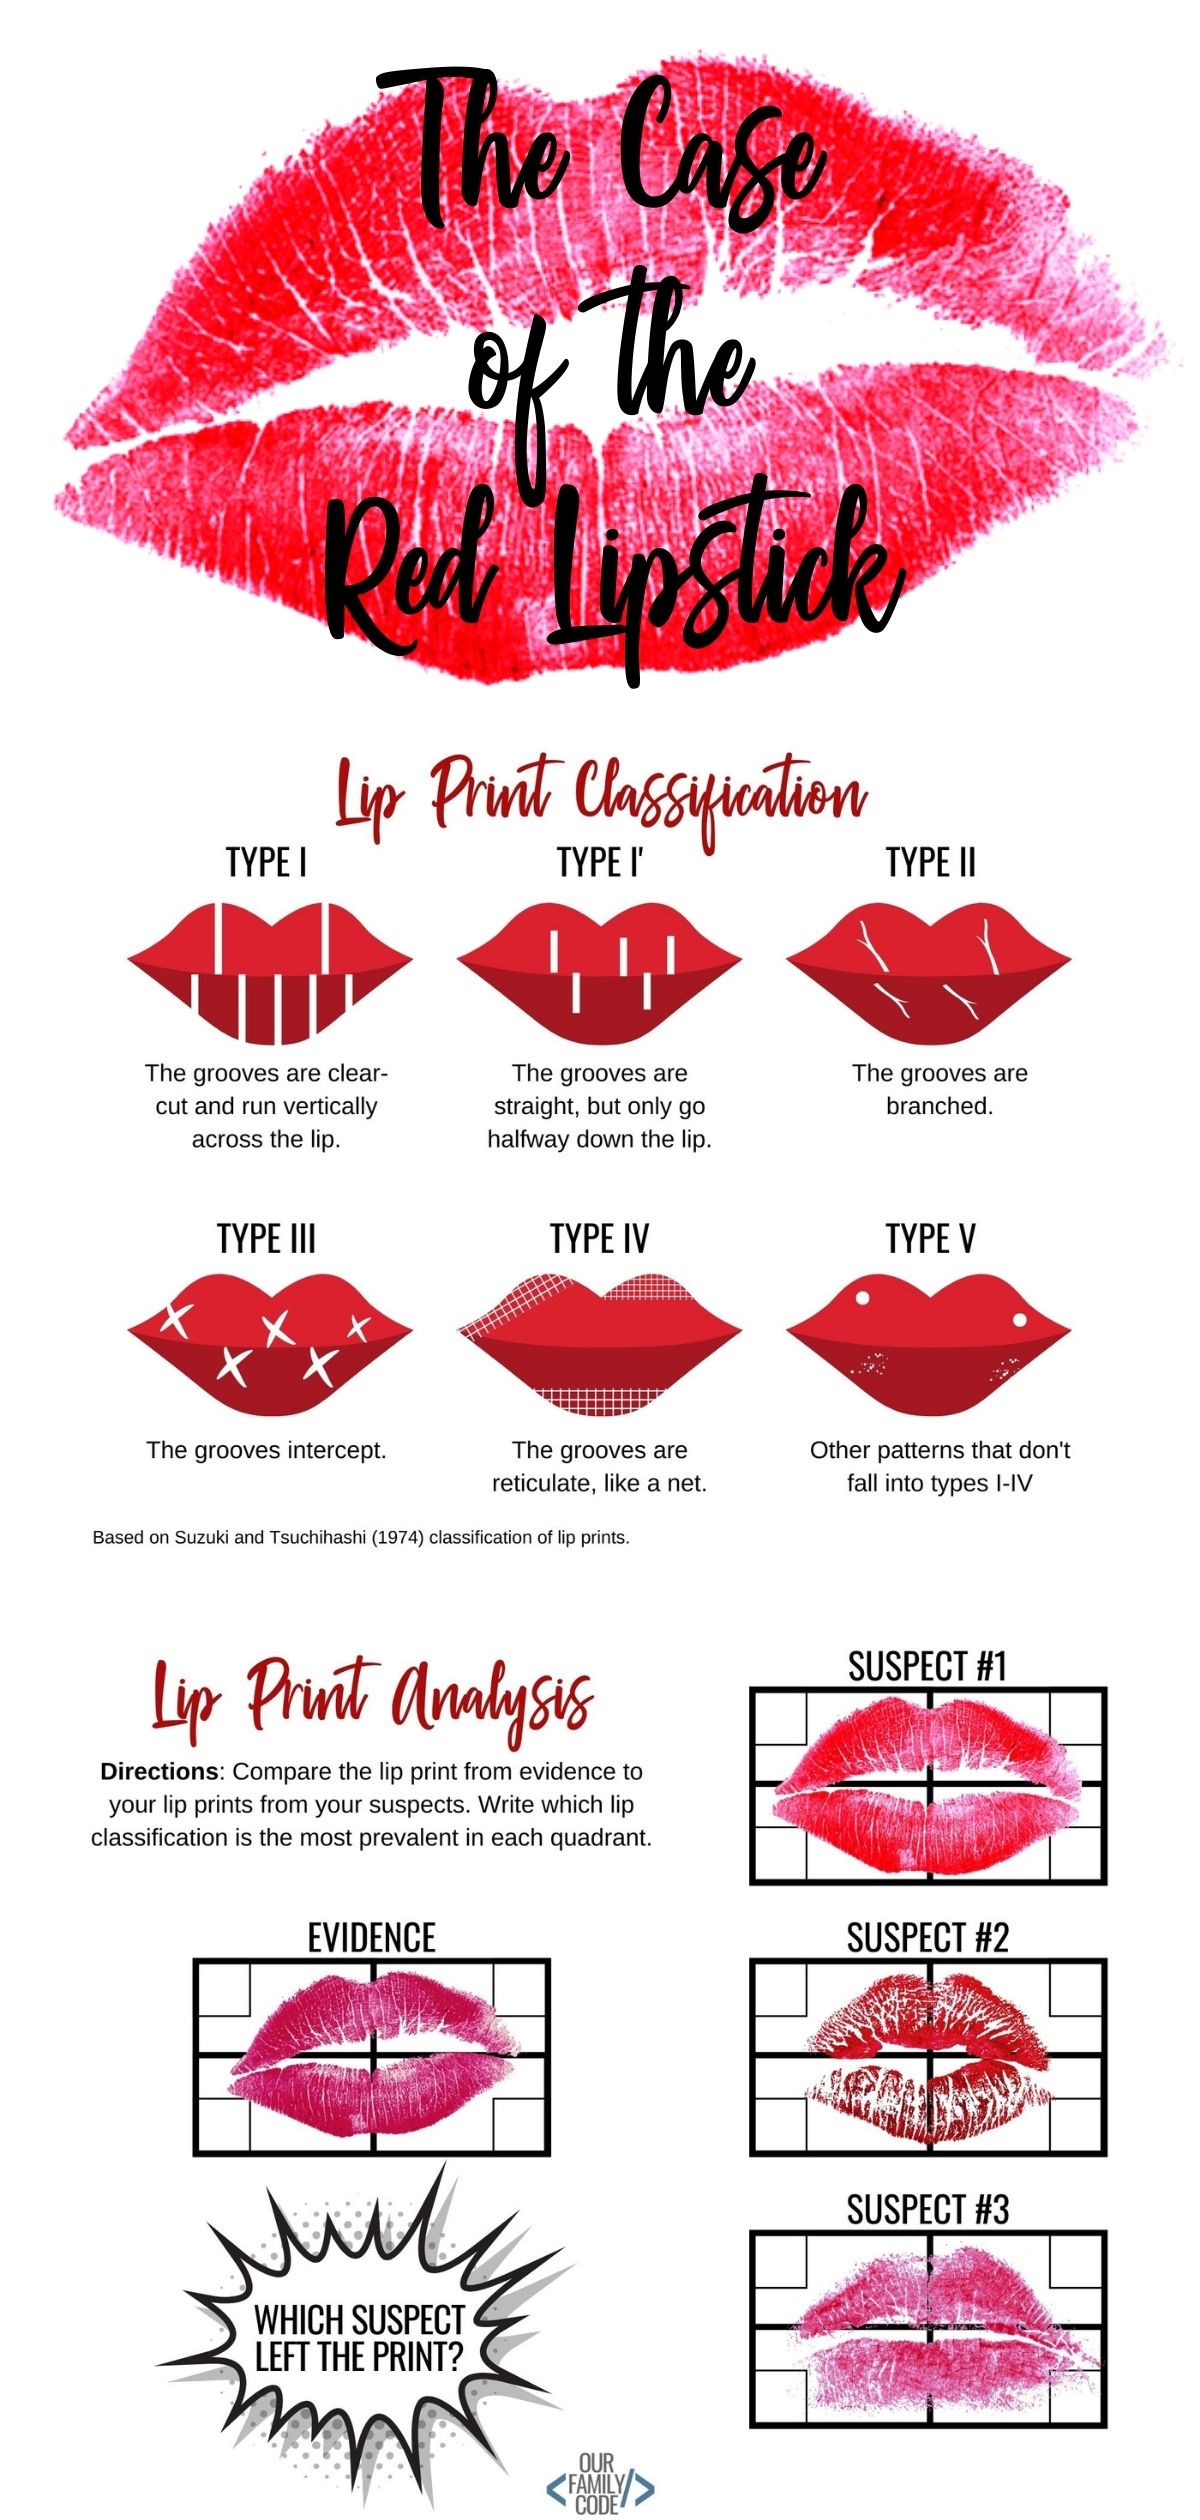 The Case of the Red Lipstick - Learn about cheiloscopy and lip prints in this STEAM forensic science investigation for kids! #STEAMActivities #forensicscienceforkids #Scienceforkids #STEM #STEAM